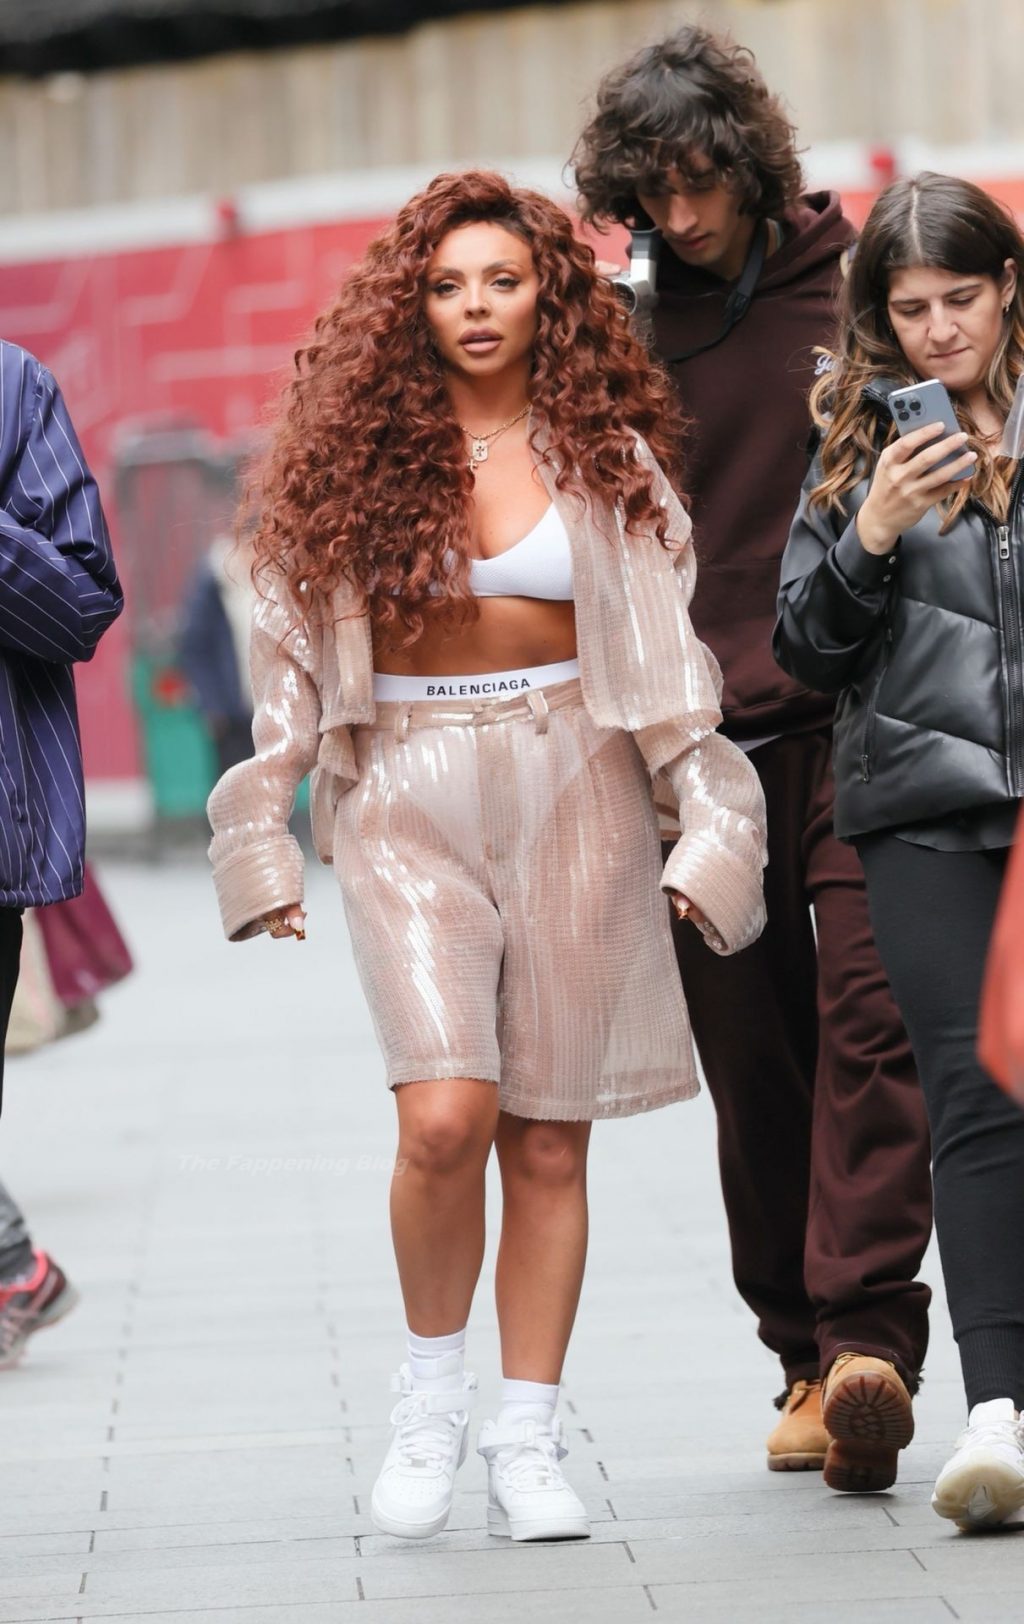 Jesy Nelson Looks Hot in a Revealing Outfit After Releasing Her First Solo Single (139 Photos)